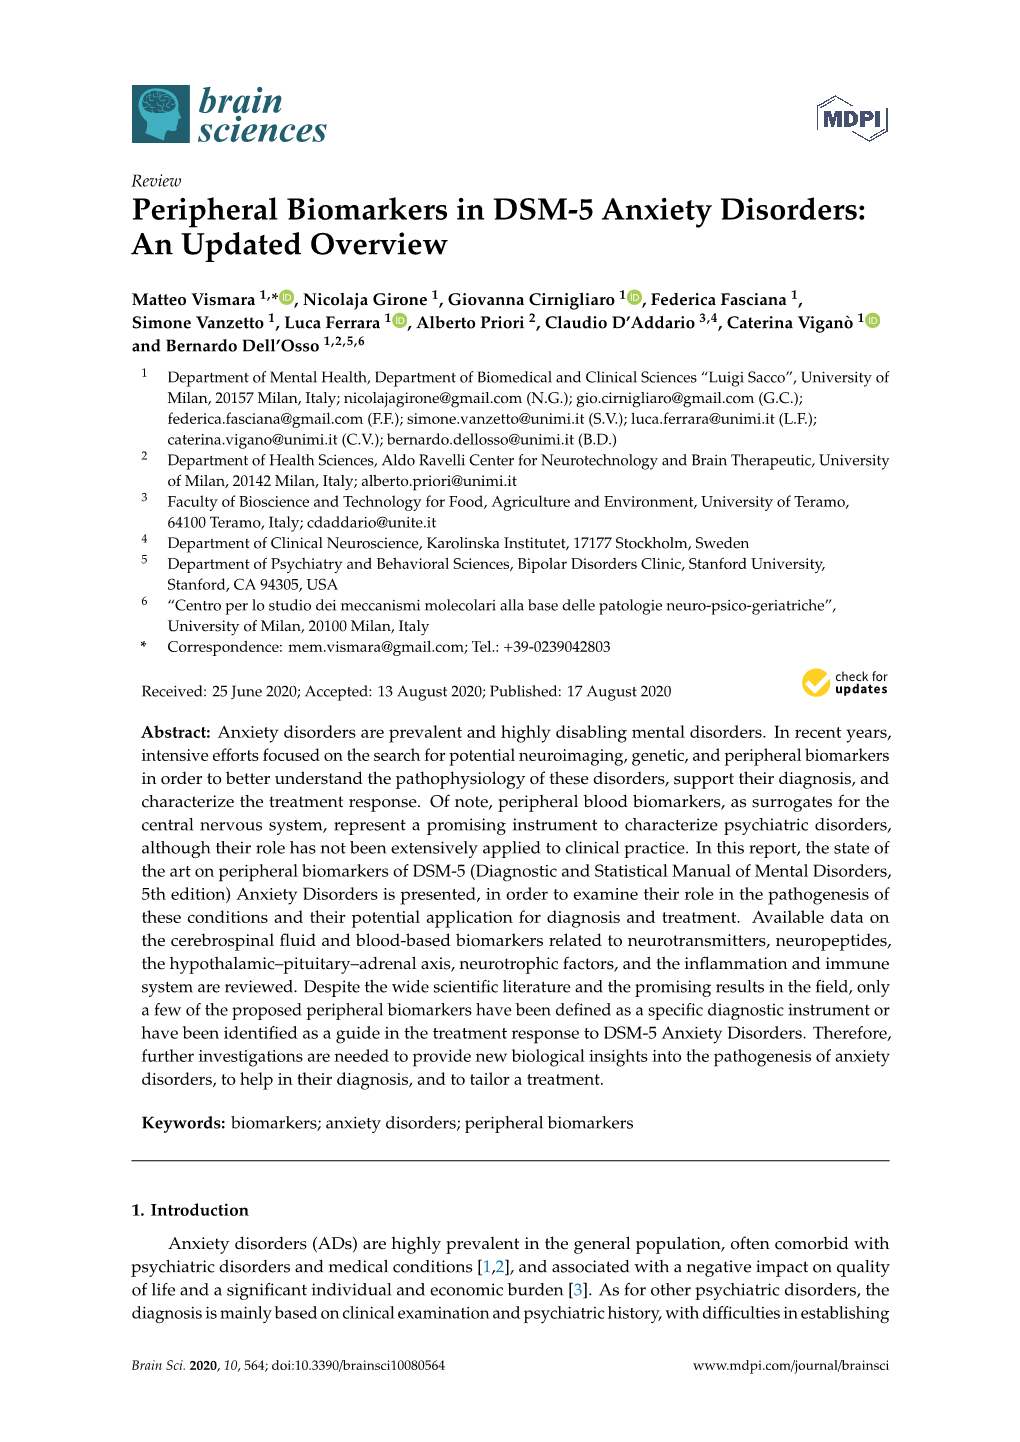 Peripheral Biomarkers in DSM-5 Anxiety Disorders: an Updated Overview